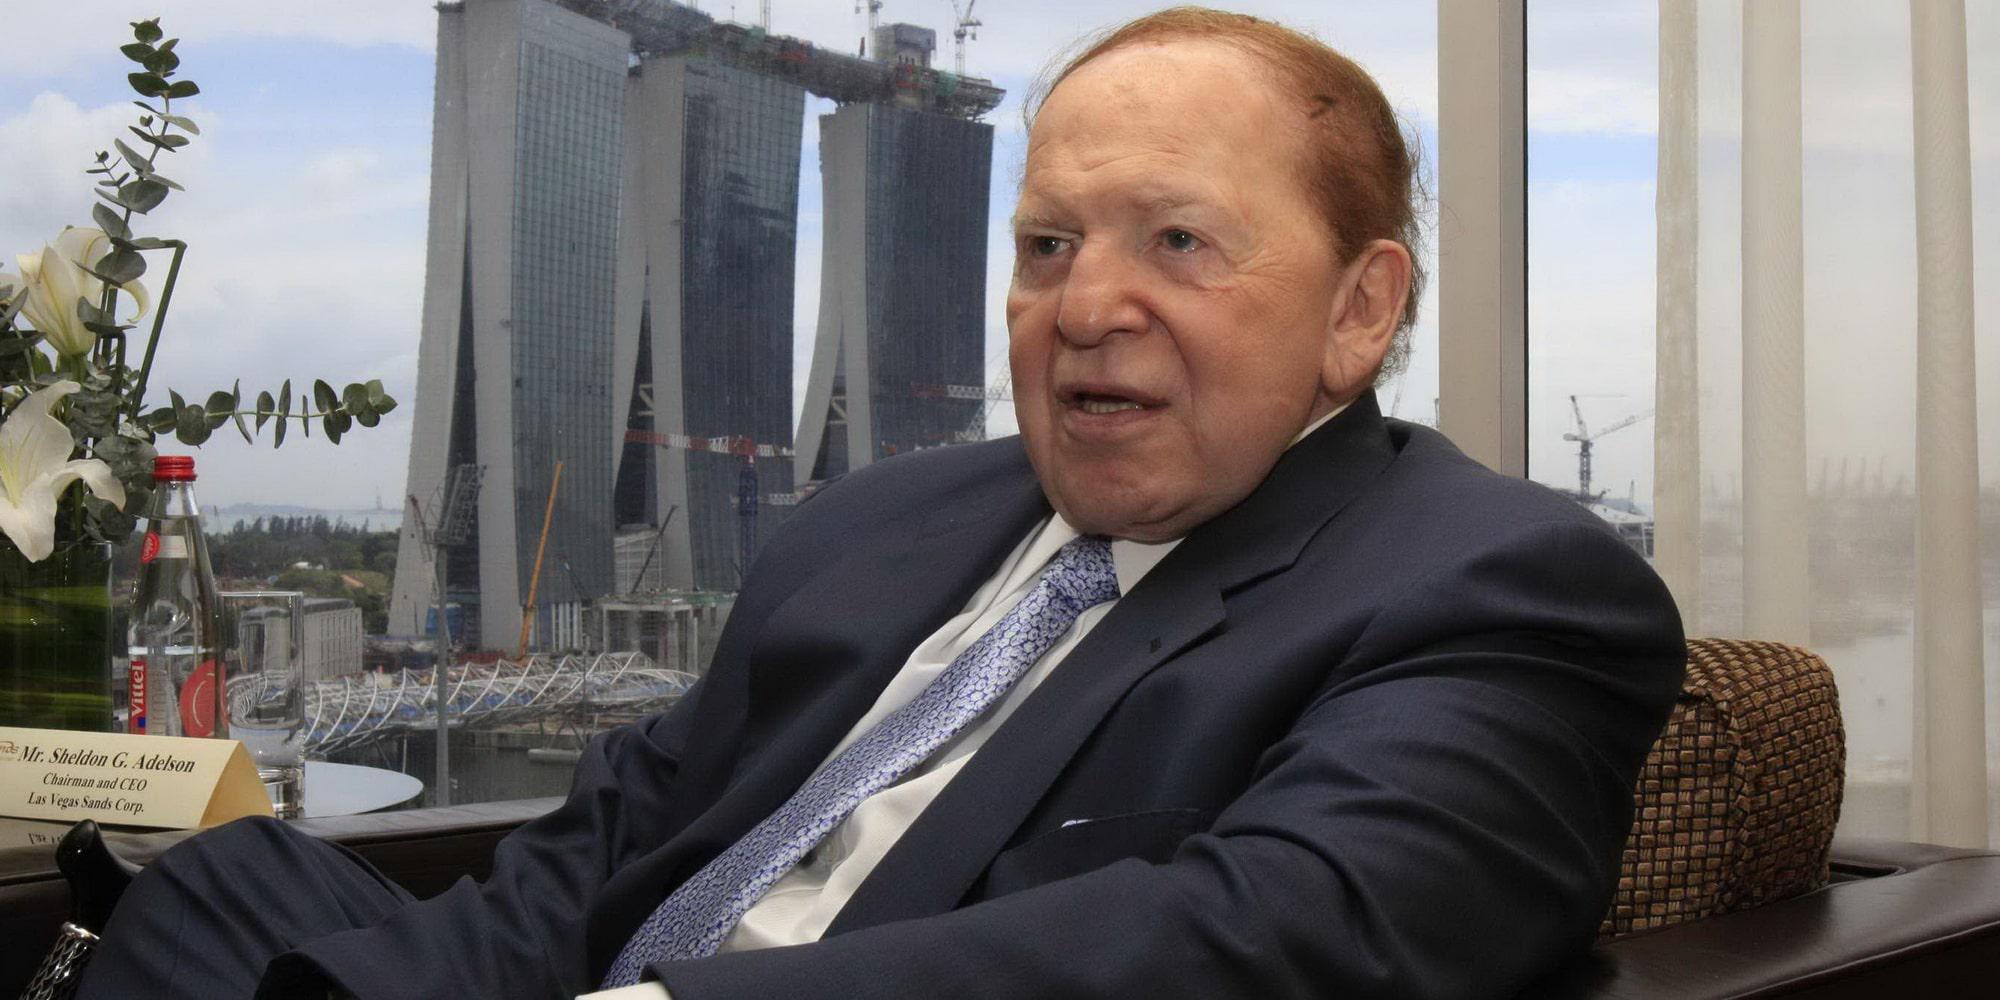 10 of the Best Rags to Riches Stories that Will Leave you Speechless-Sheldon Adelson